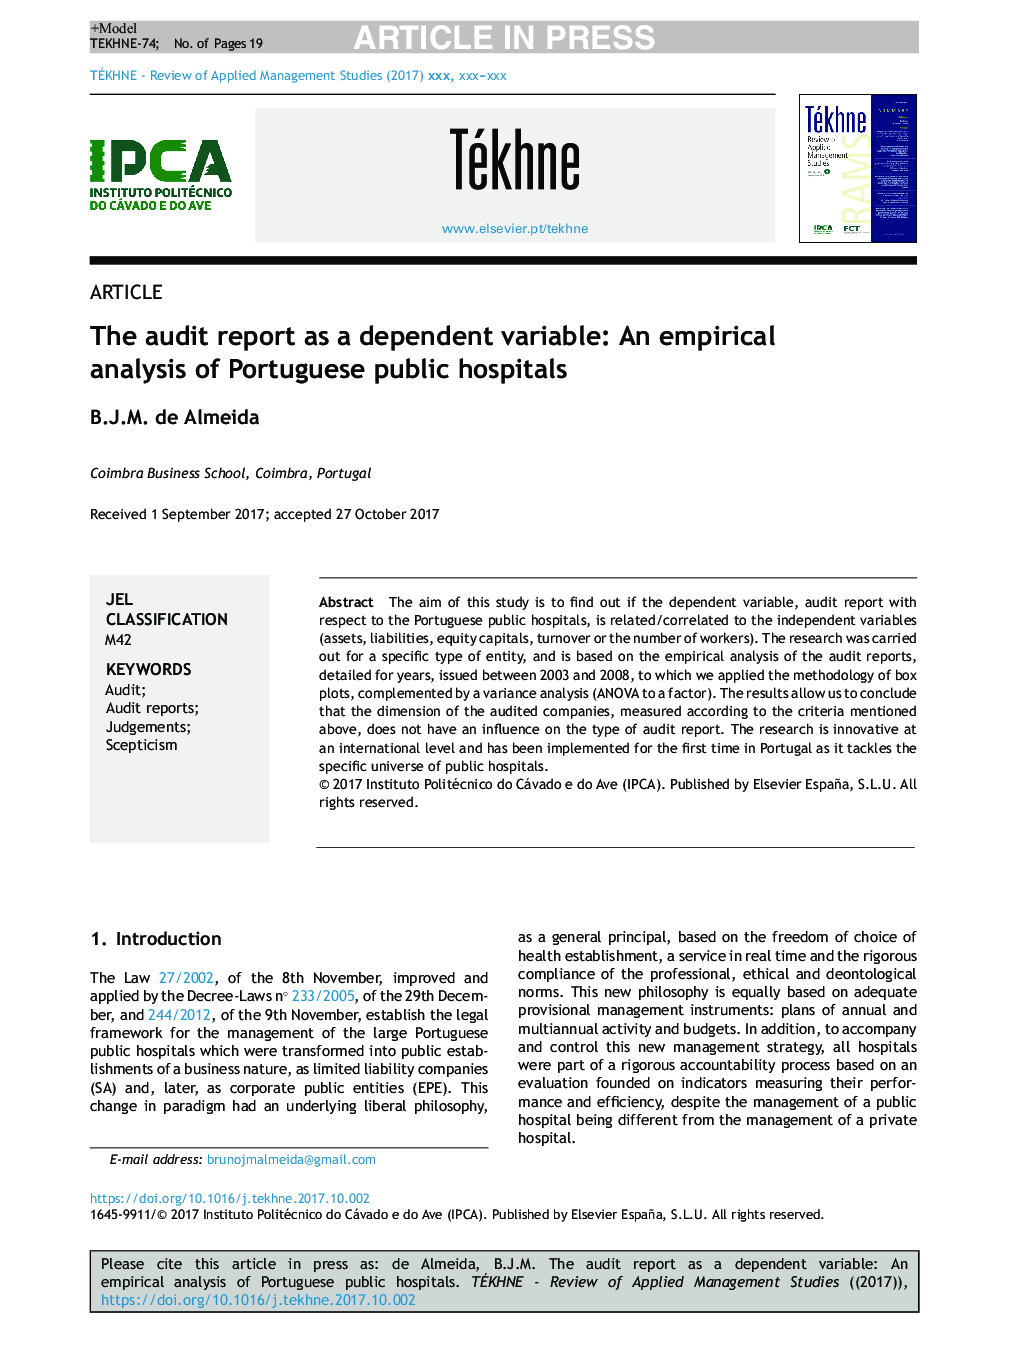 The audit report as a dependent variable: An empirical analysis of Portuguese public hospitals